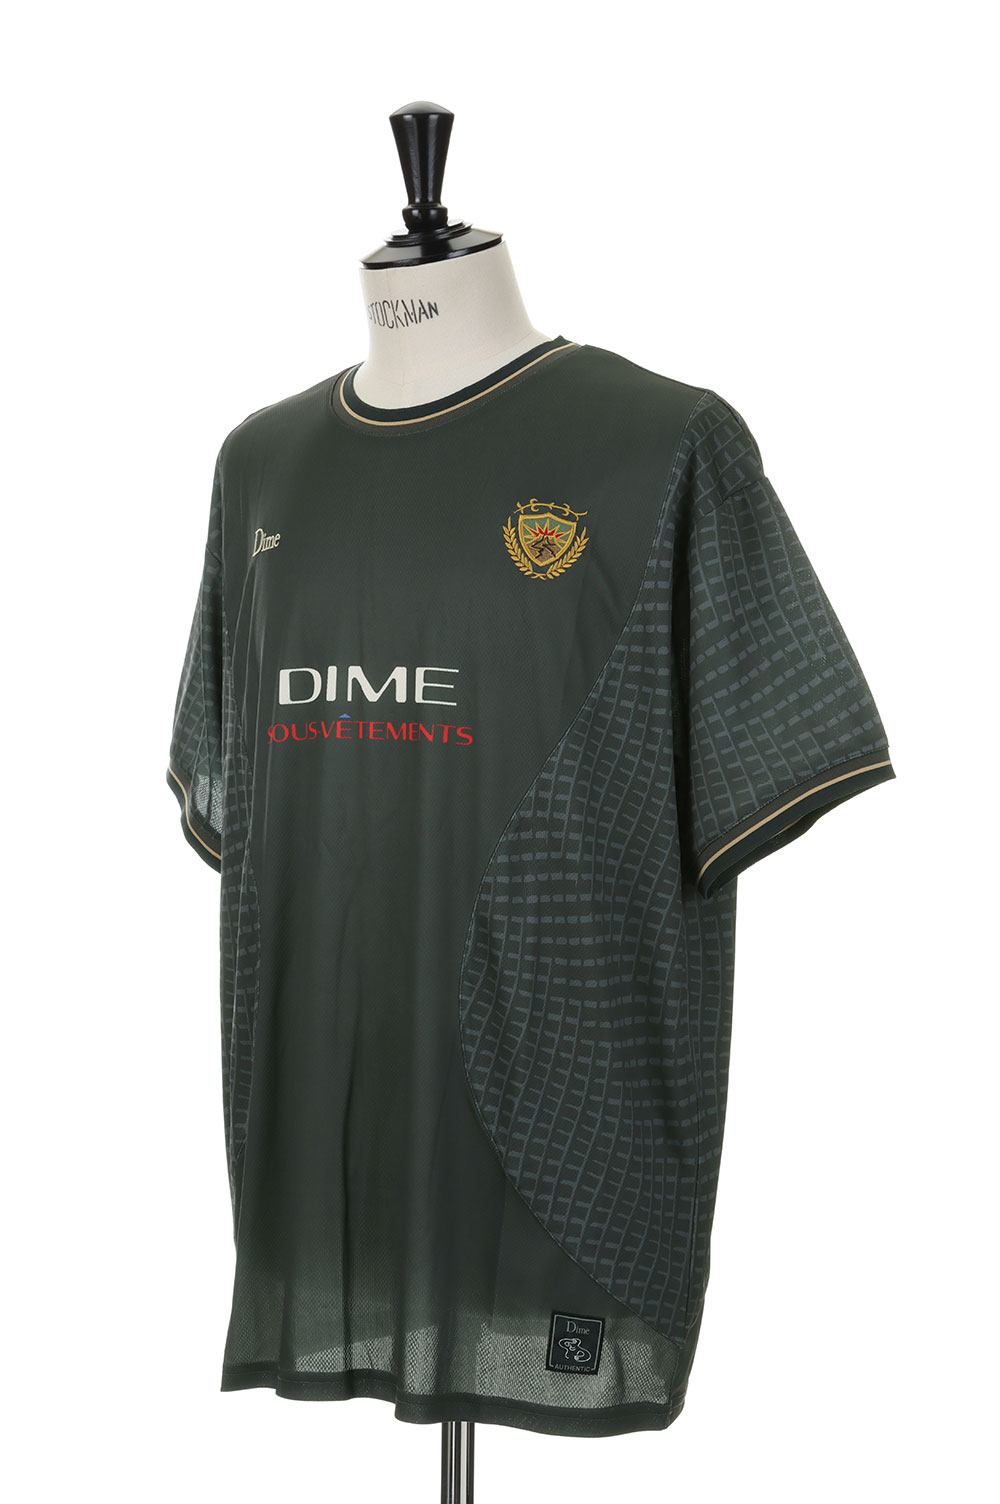 DIME MTL ATHLETIC JERSEY CHARCOAL - ウェア